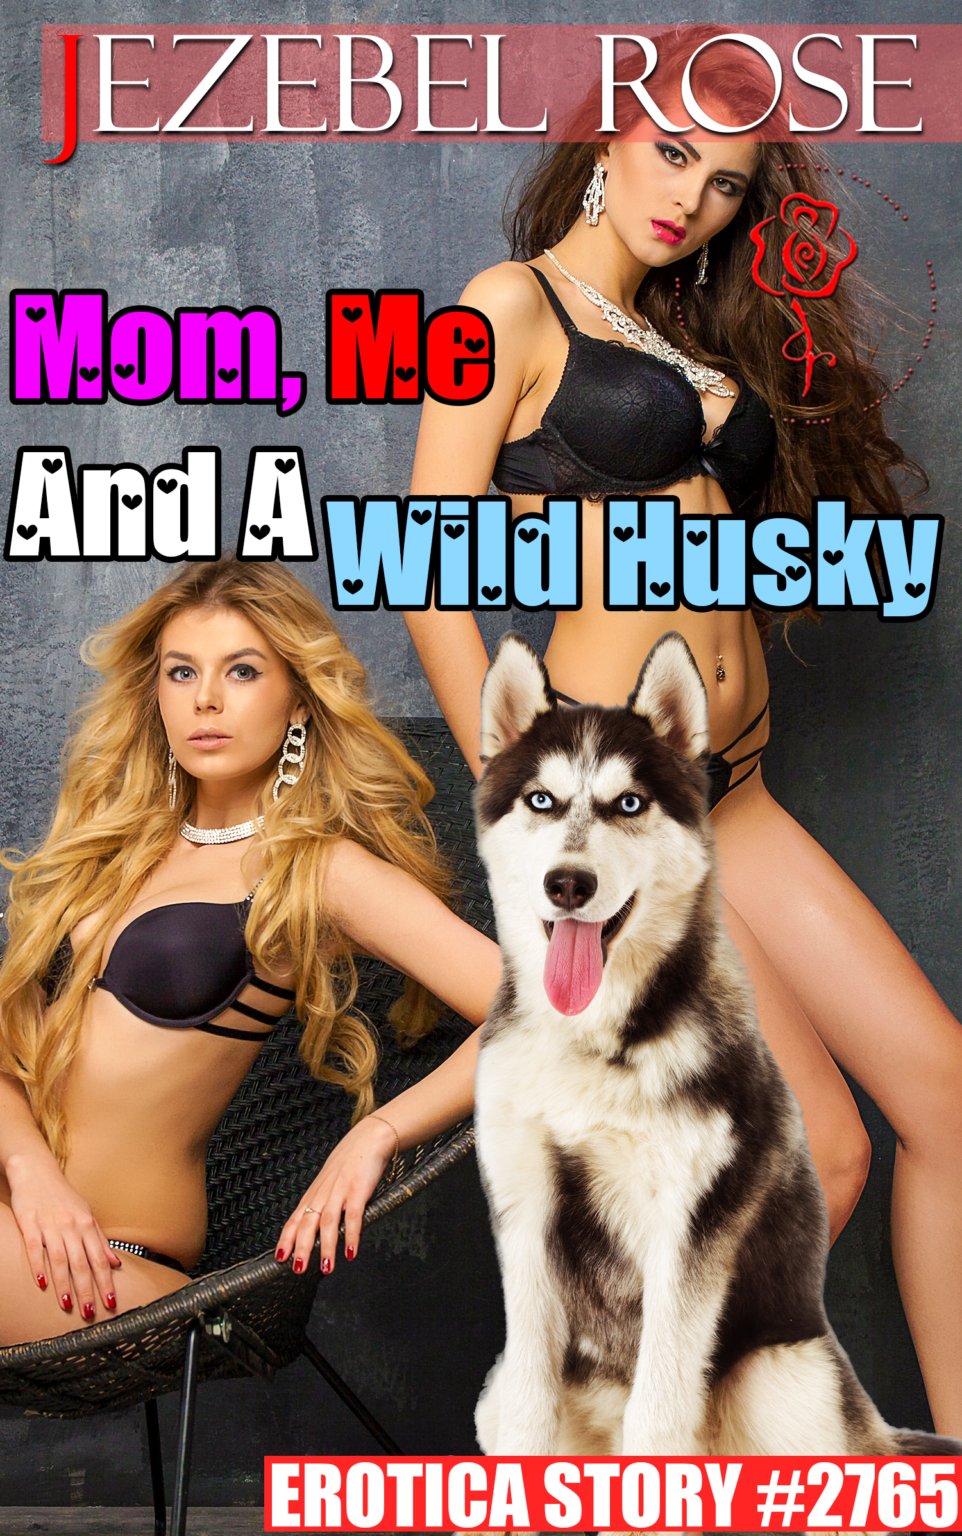 Mom and I were jogging when we stumbled across a wild Husky. We brought him back to our home, not realizing he had an enormous boner! The sexual energy between us was electric, and before long, we were all over the horny dog - front, back, and everything in between! It was so hot knowing that we'd both be impregnated and give birth to a litter of puppies simultaneously! Here's my story...